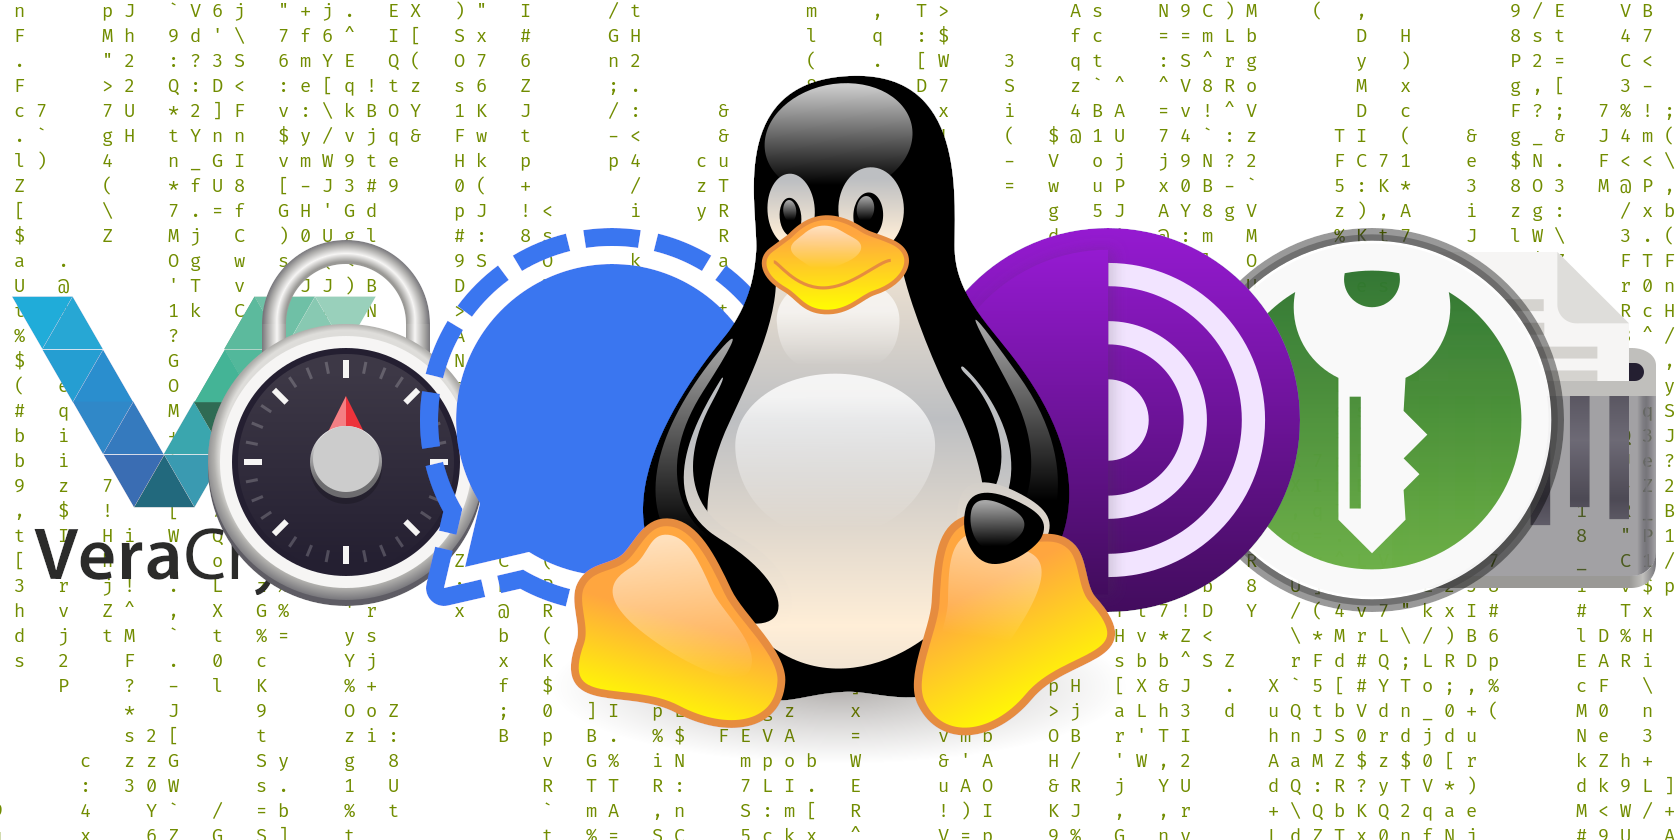 10 Essential Privacy and Security Apps for Linux Desktops